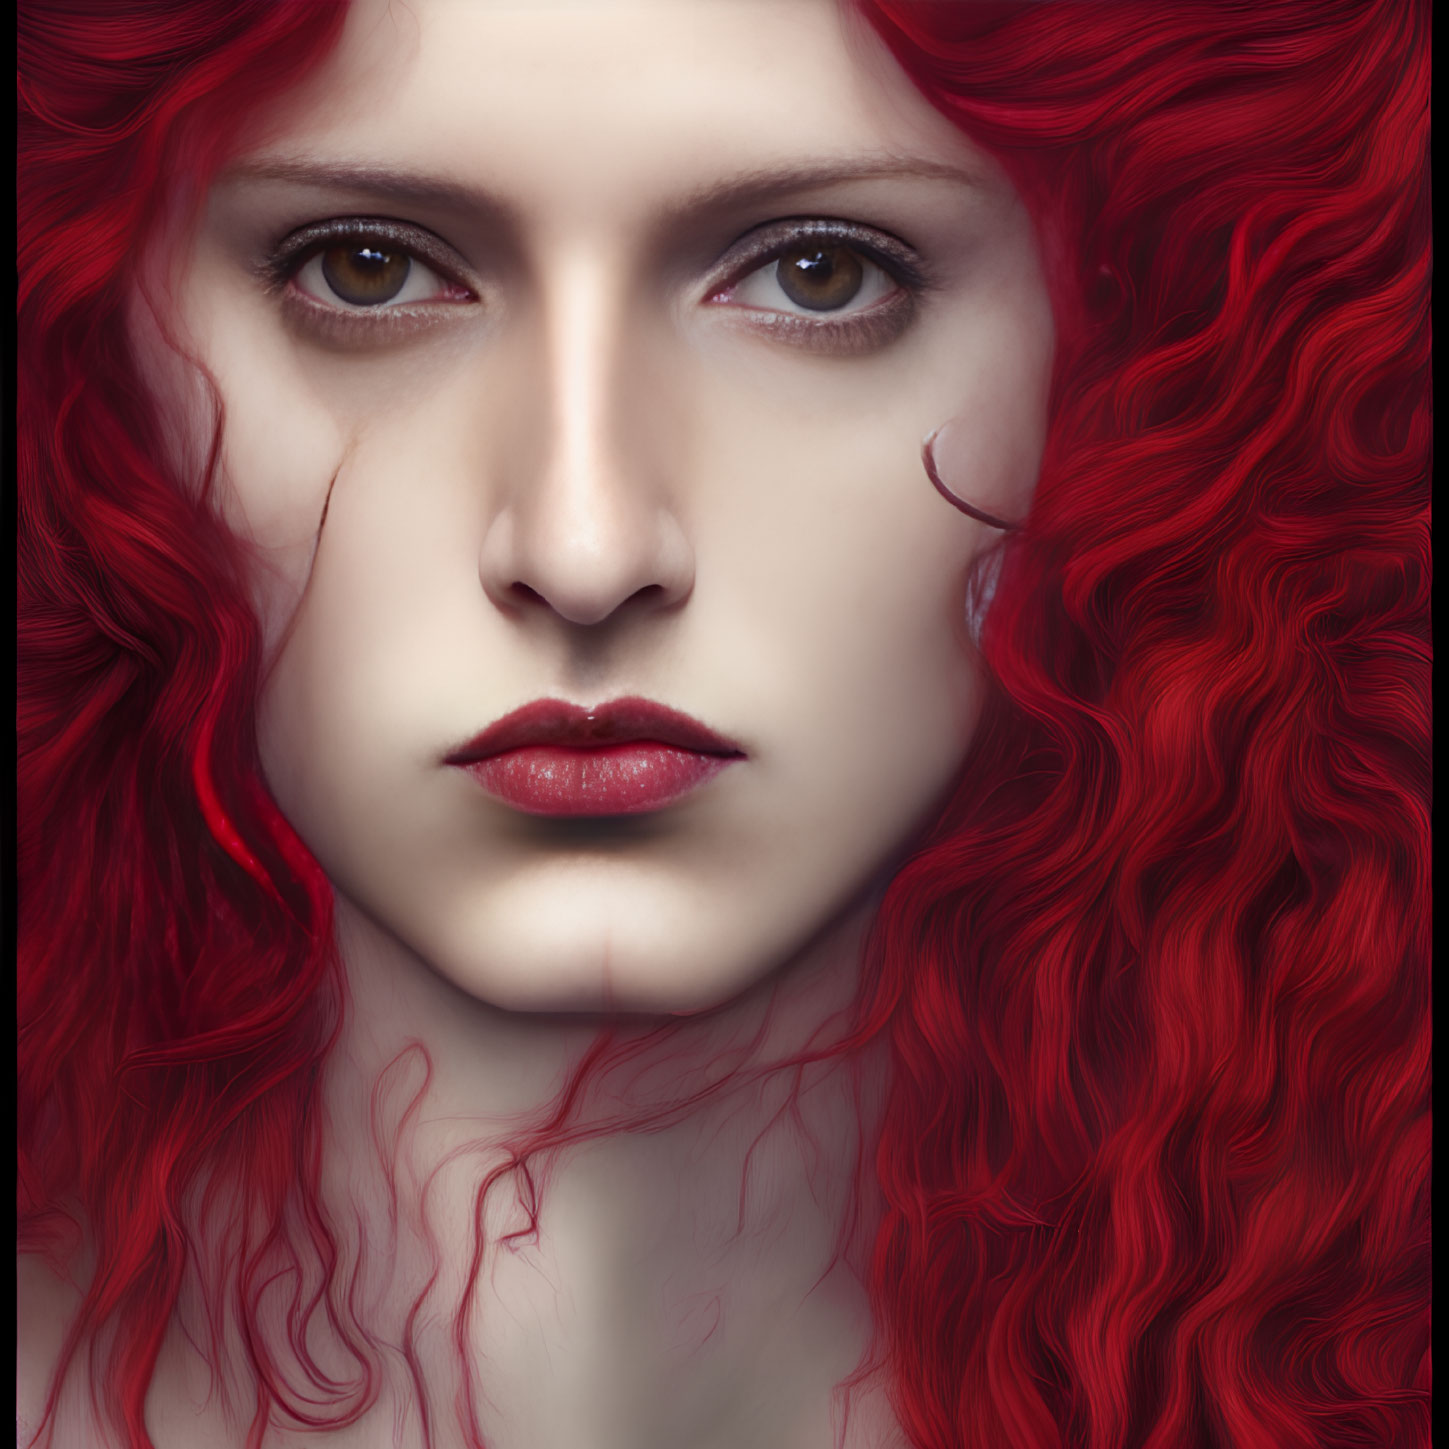 Detailed Close-Up of Person with Vibrant Red Curly Hair and Intense Gaze